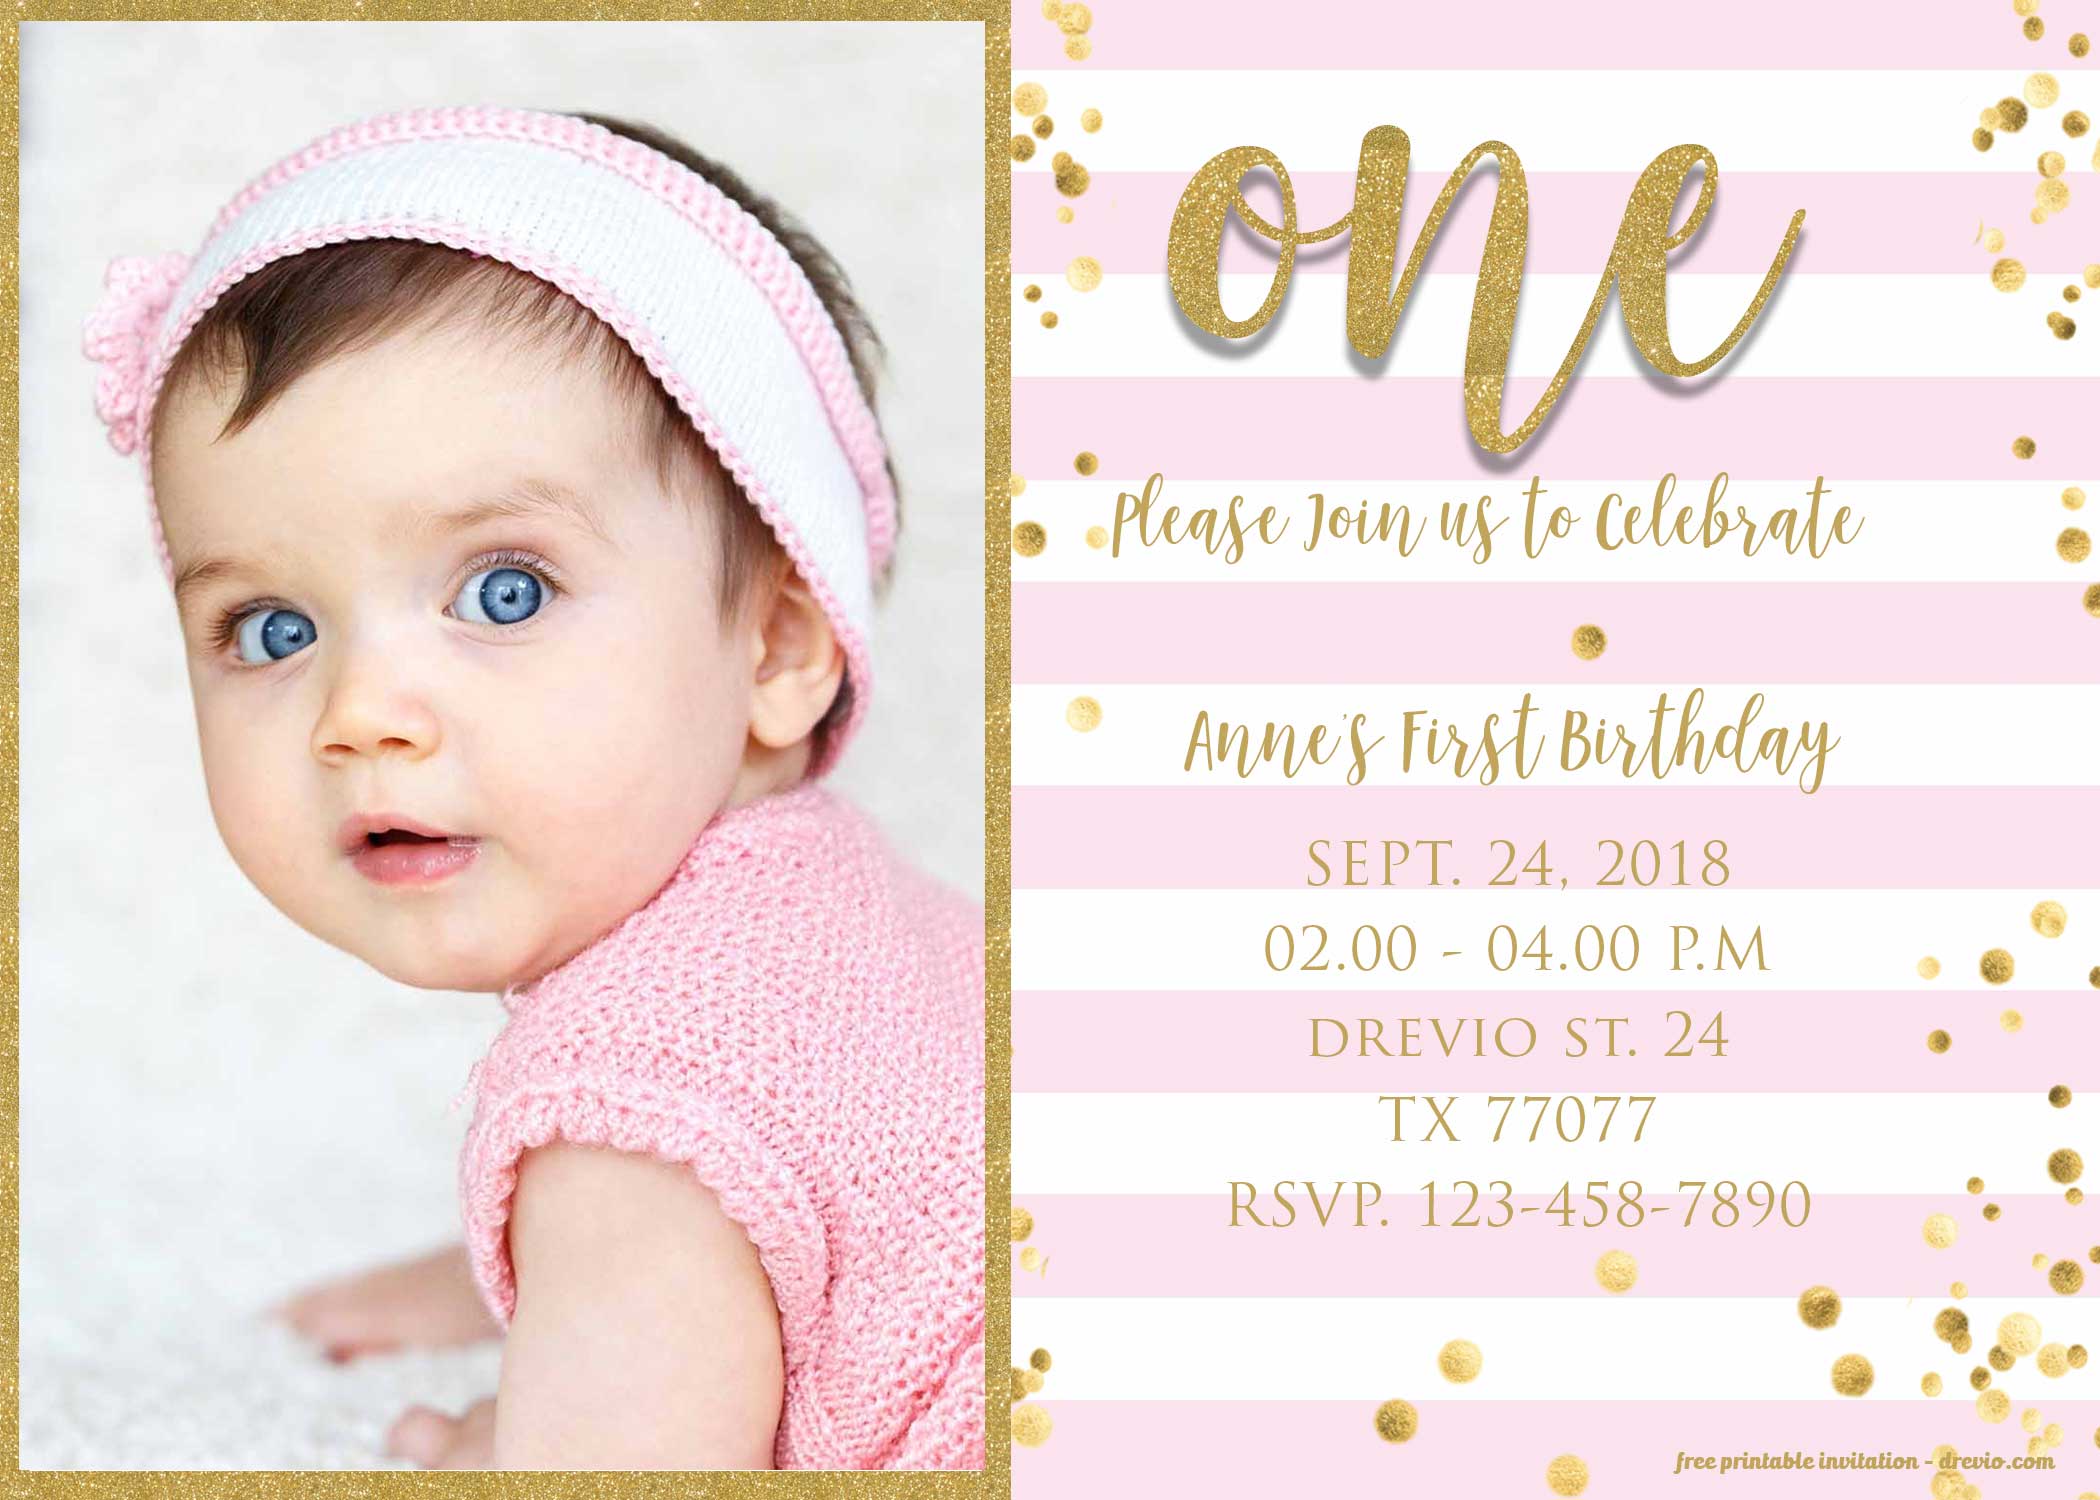 FREE 1st Birthday Invitation Pink and Gold glitter Template FREE